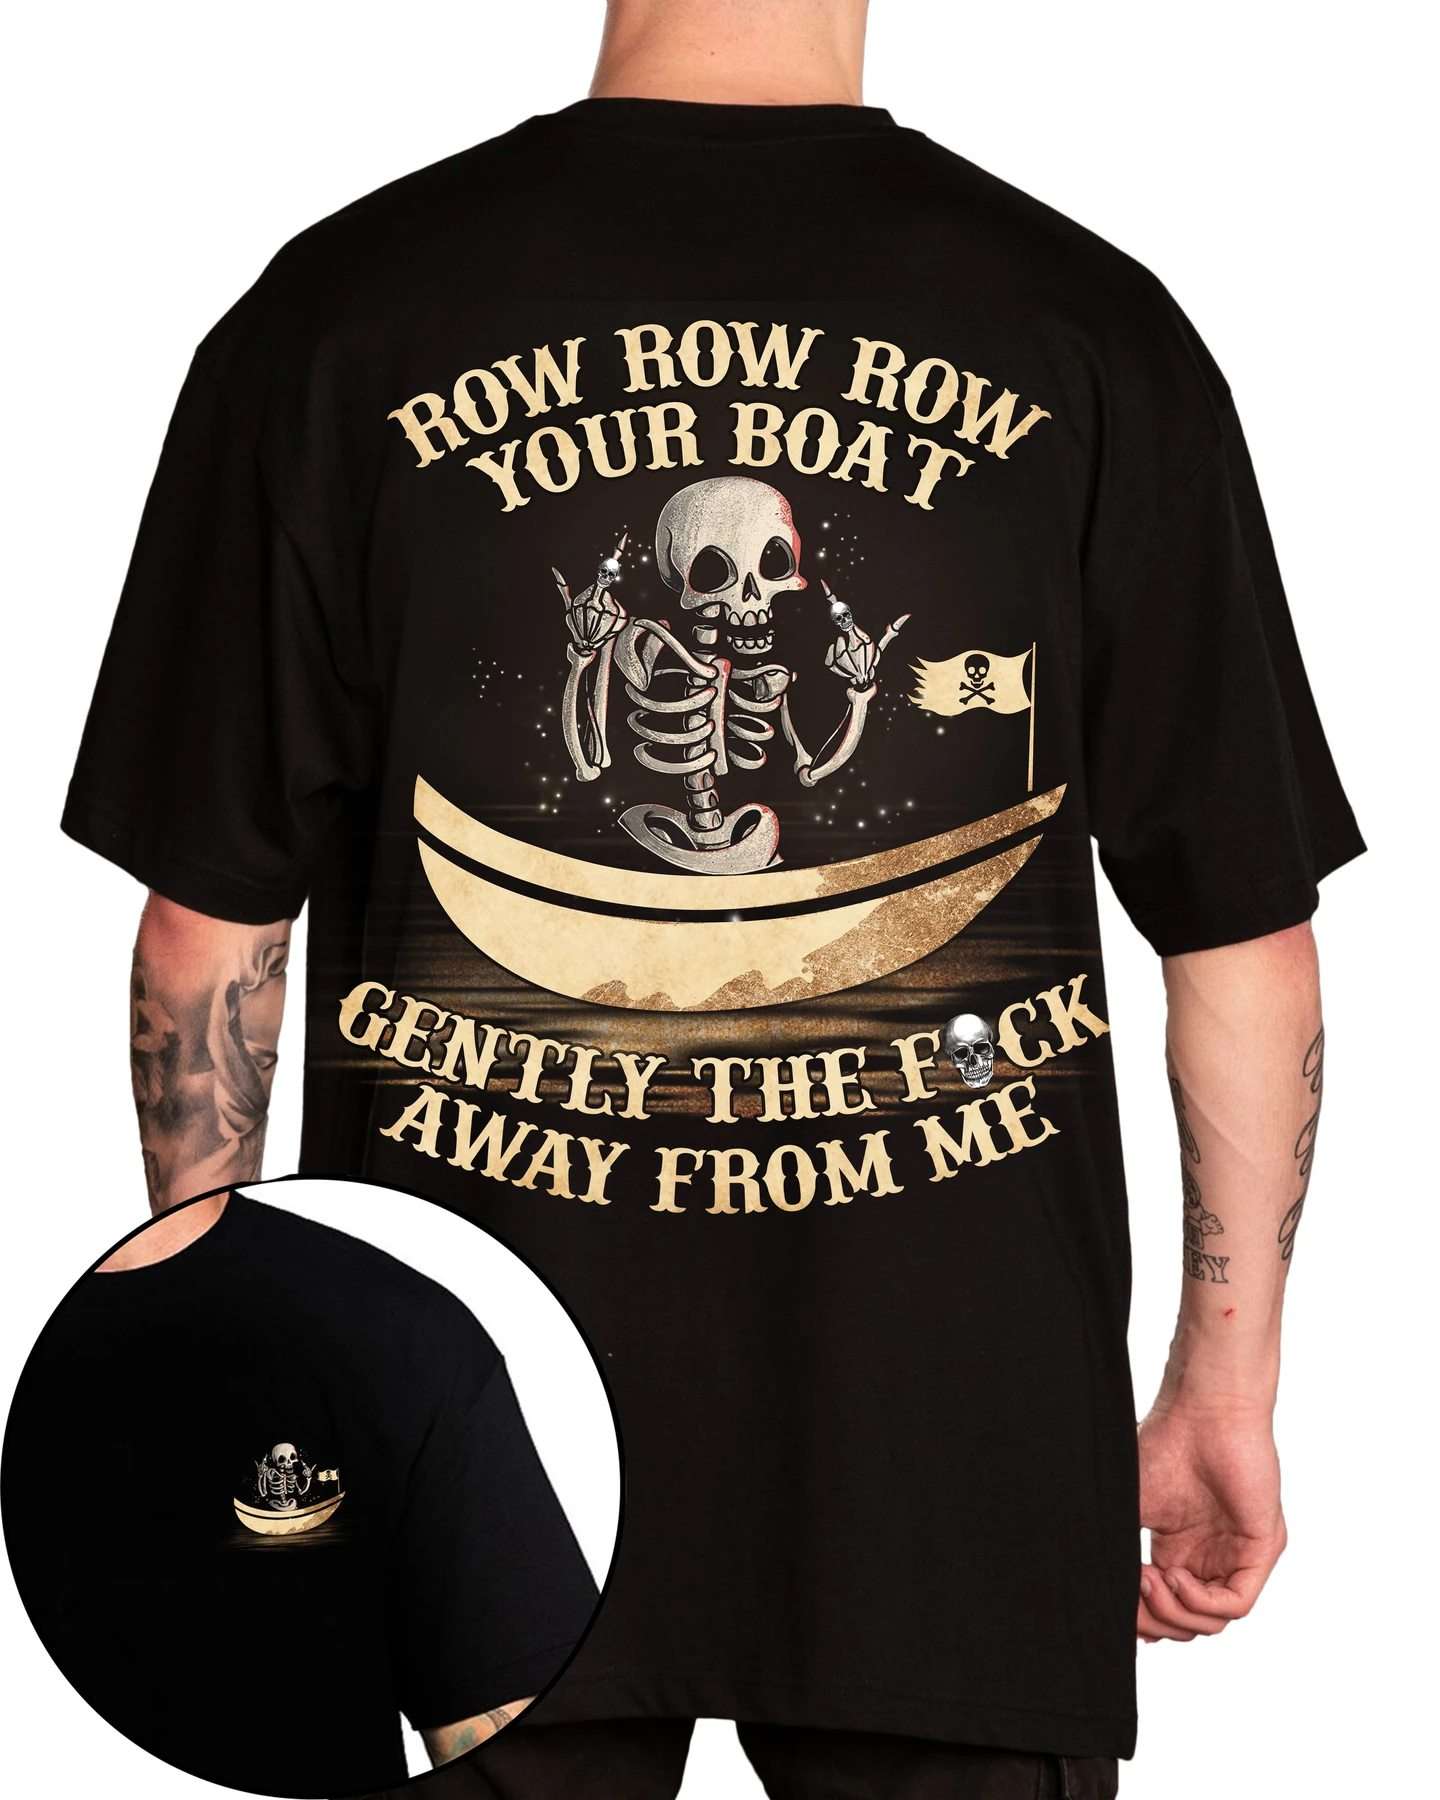 Row row row your boat, gently the fuck away from me - Skull on the boat